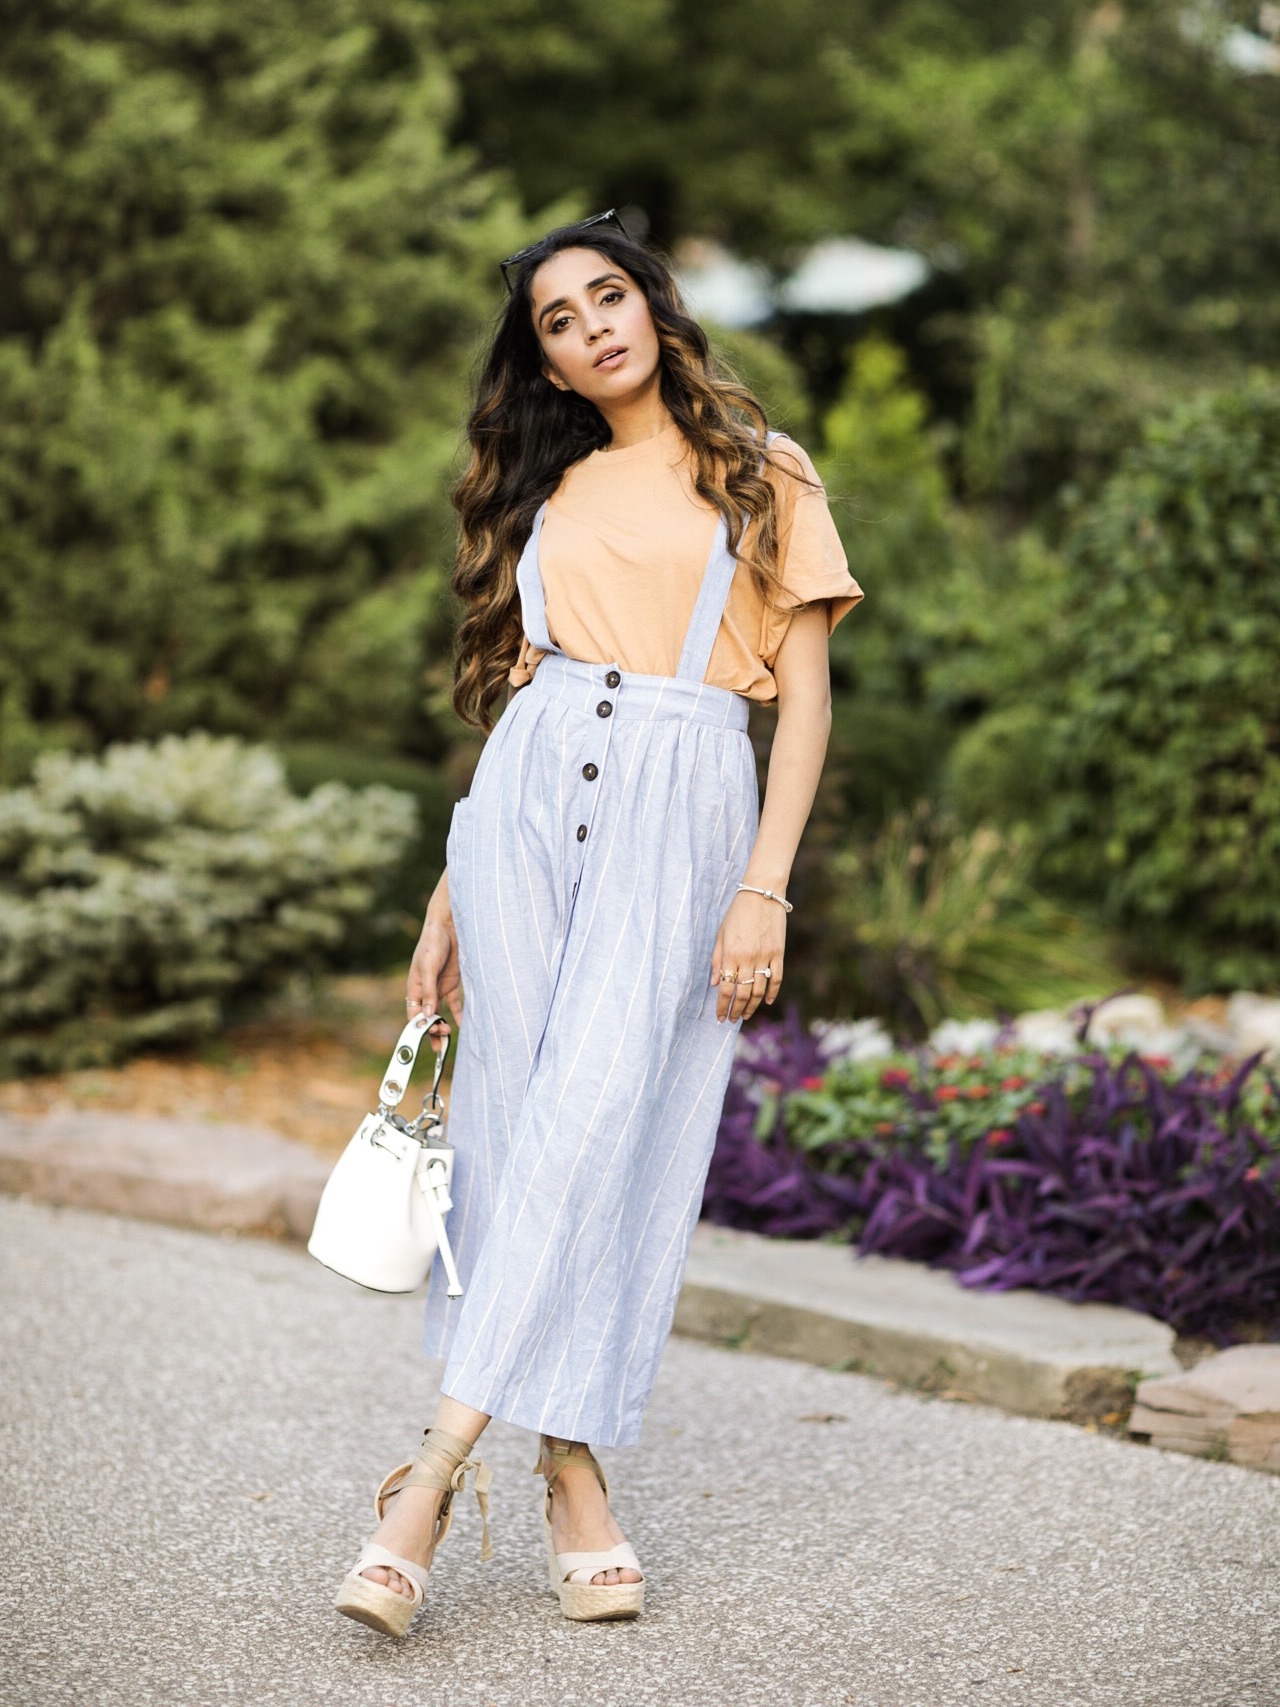 Add these Trending Summer Shoes to your Wishlist Lace up Wedges Lulus White heels 2019 trend Sincerely Humble Faiza Inam Puffy Sleeves Bouse Yellow Floral 7